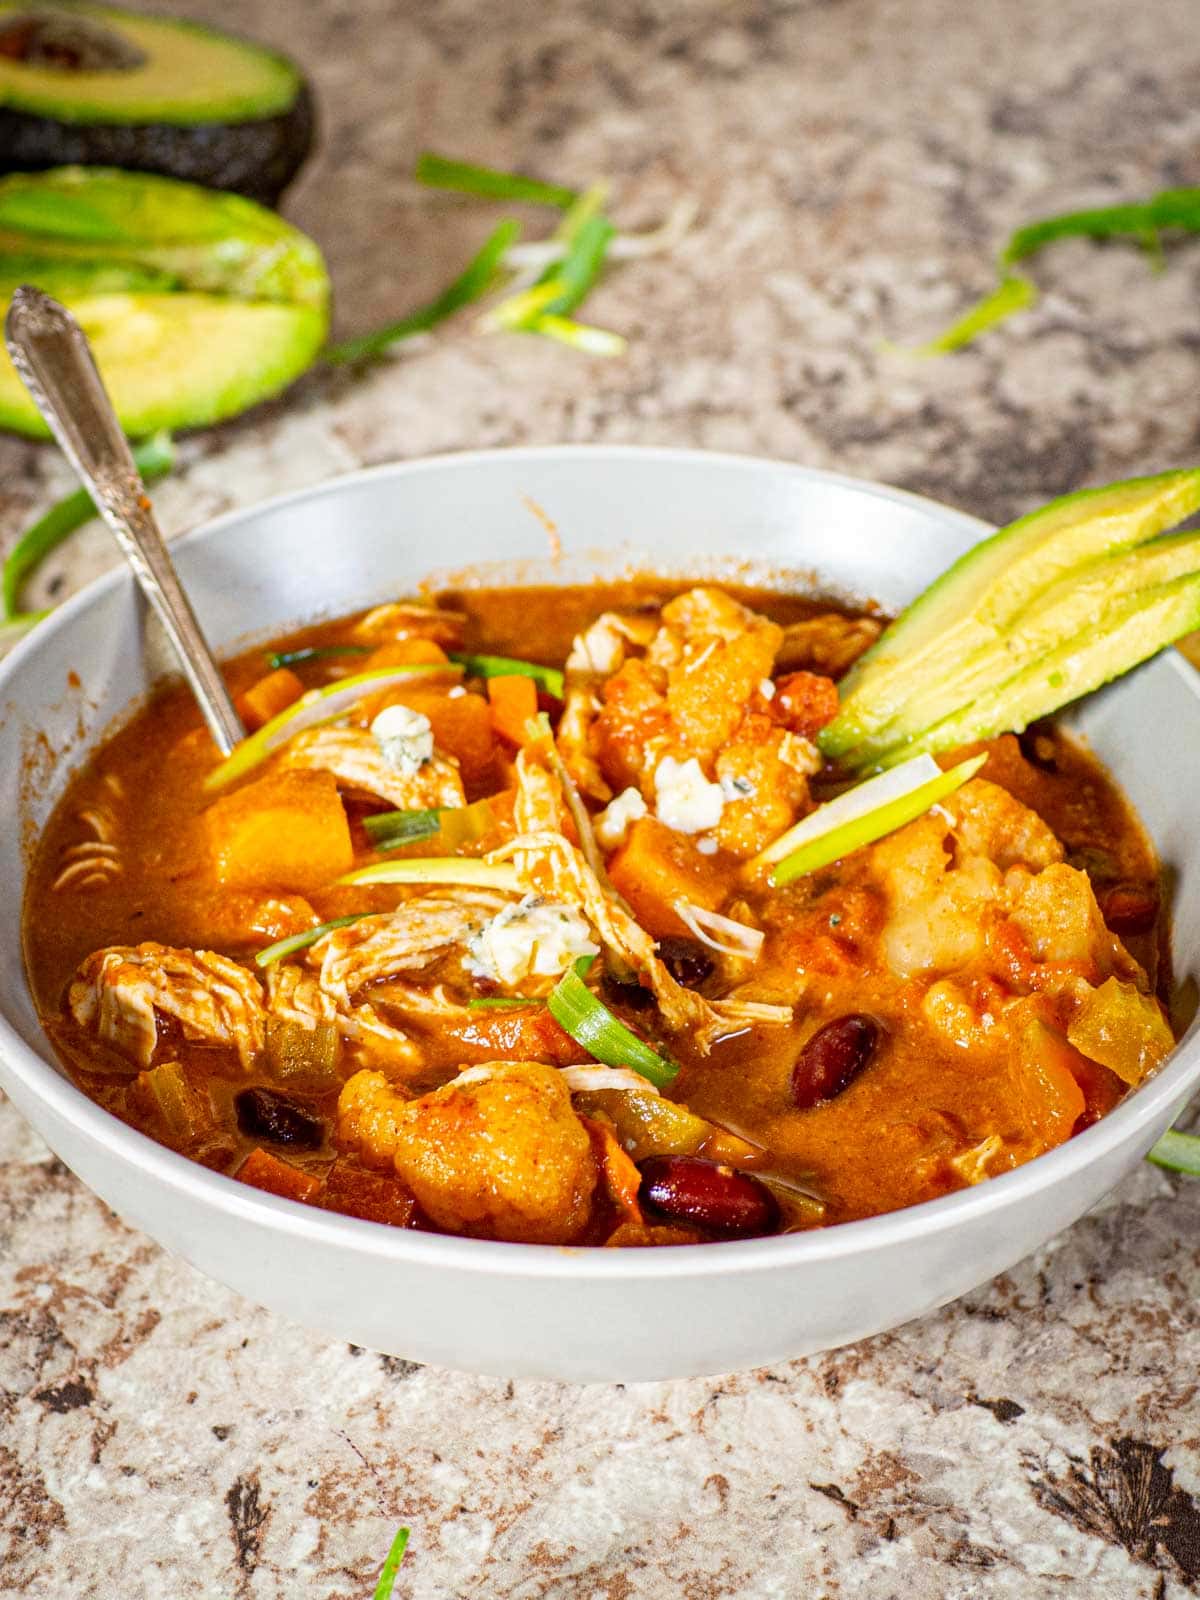 Bowl of buffalo chicken chili topped with avocado and sliced green onions.